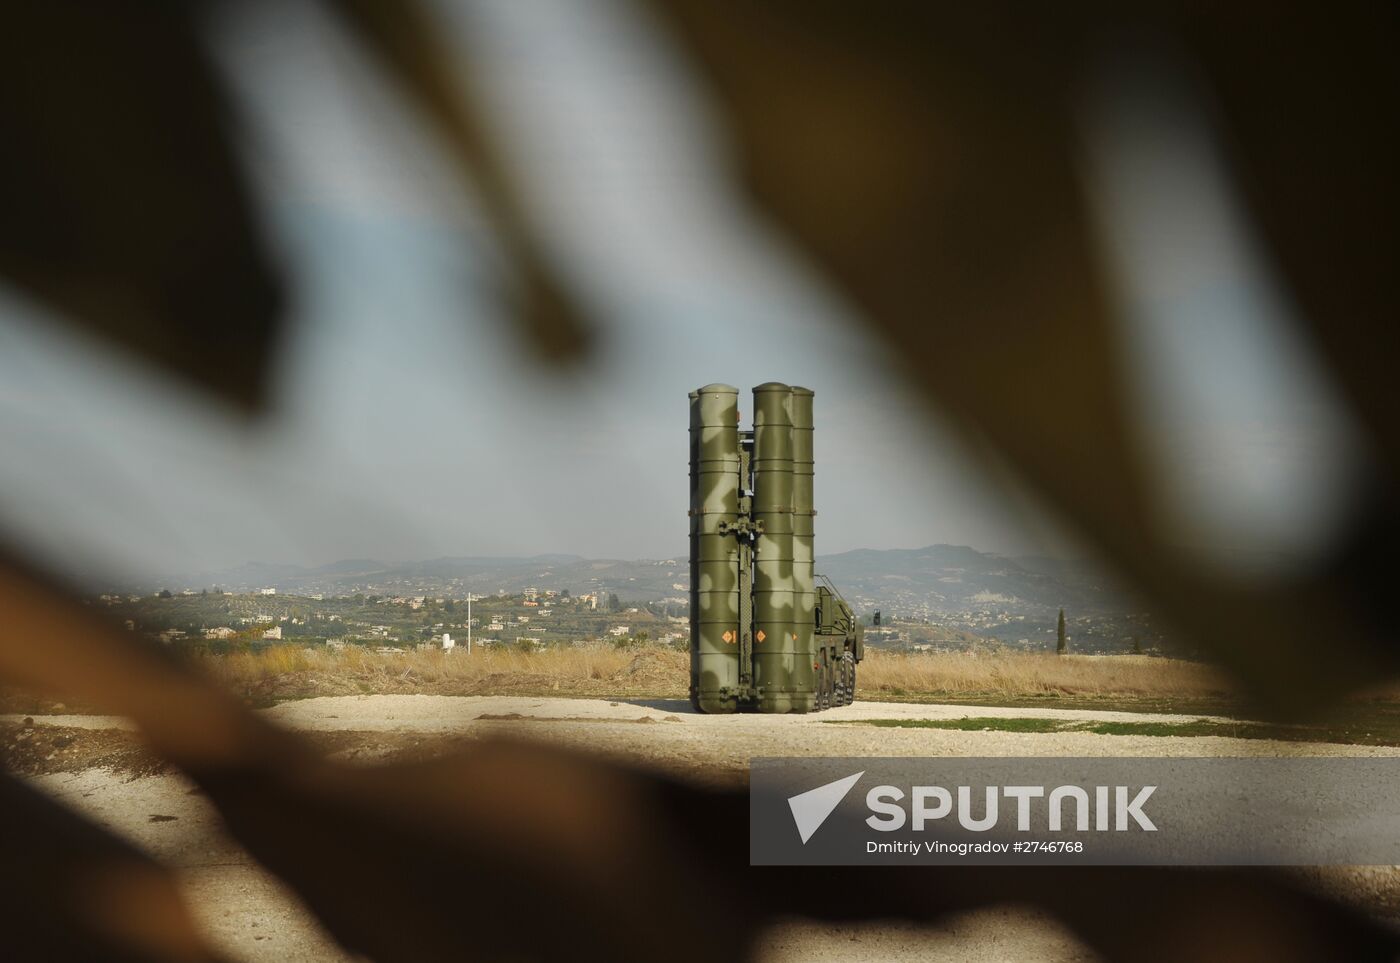 Russia deploys S-400 air defence missile system in Syria